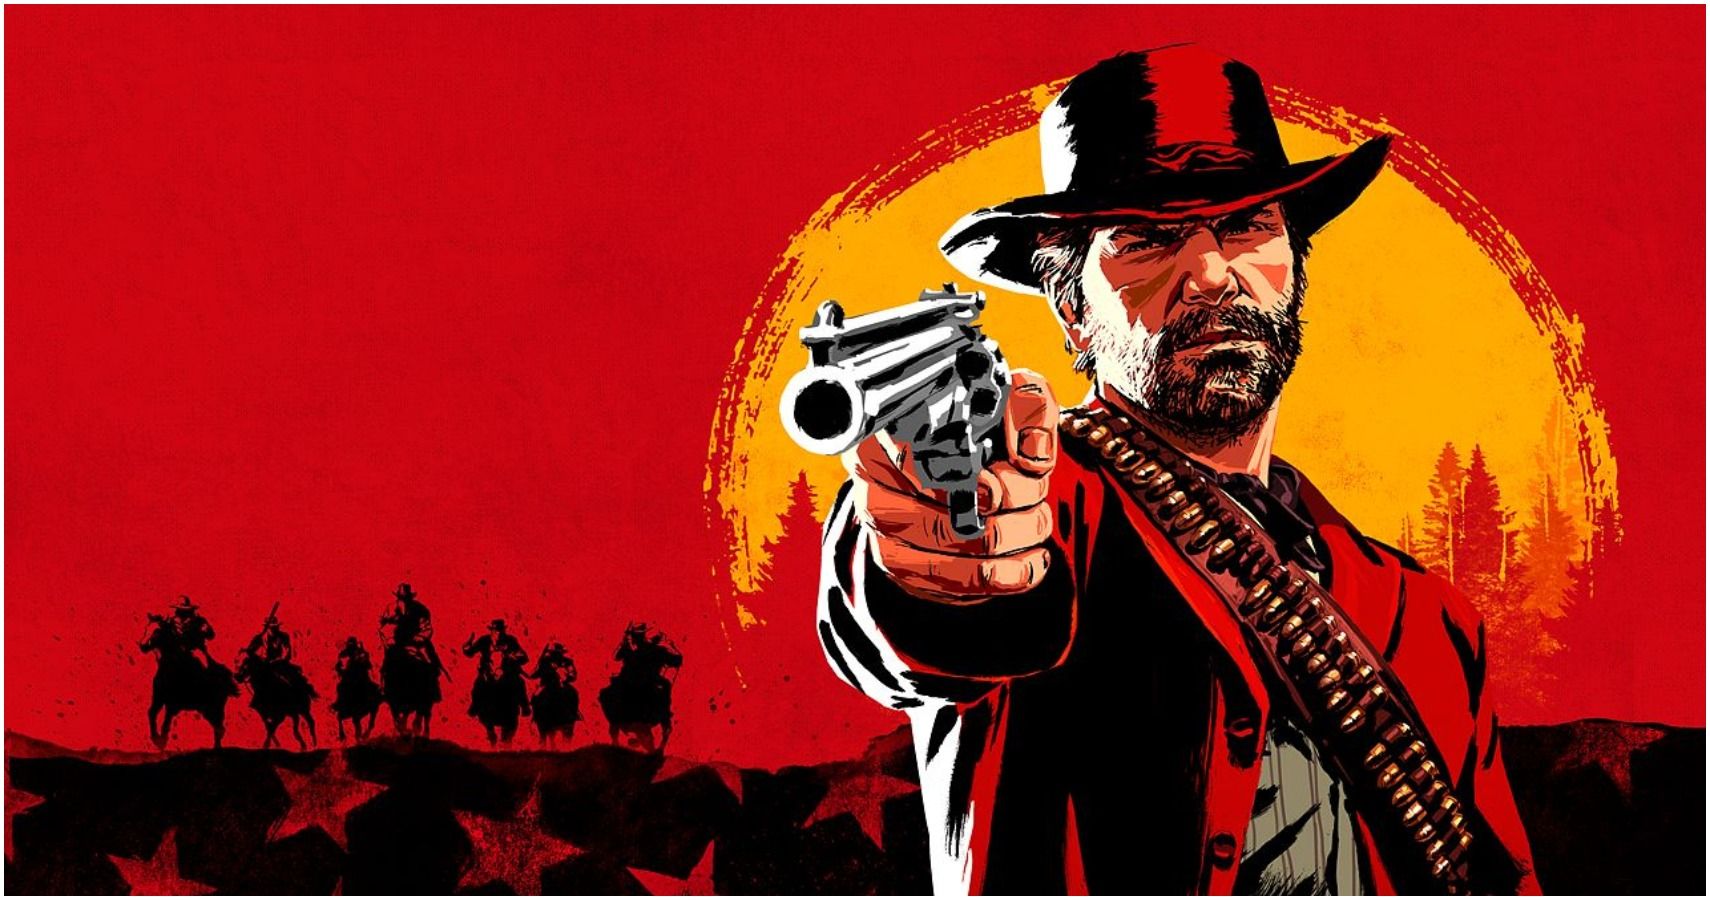 Red Dead Redemption 2 Might Be Coming To PC According To A Former Rockstar Employees LinkedIn Profile